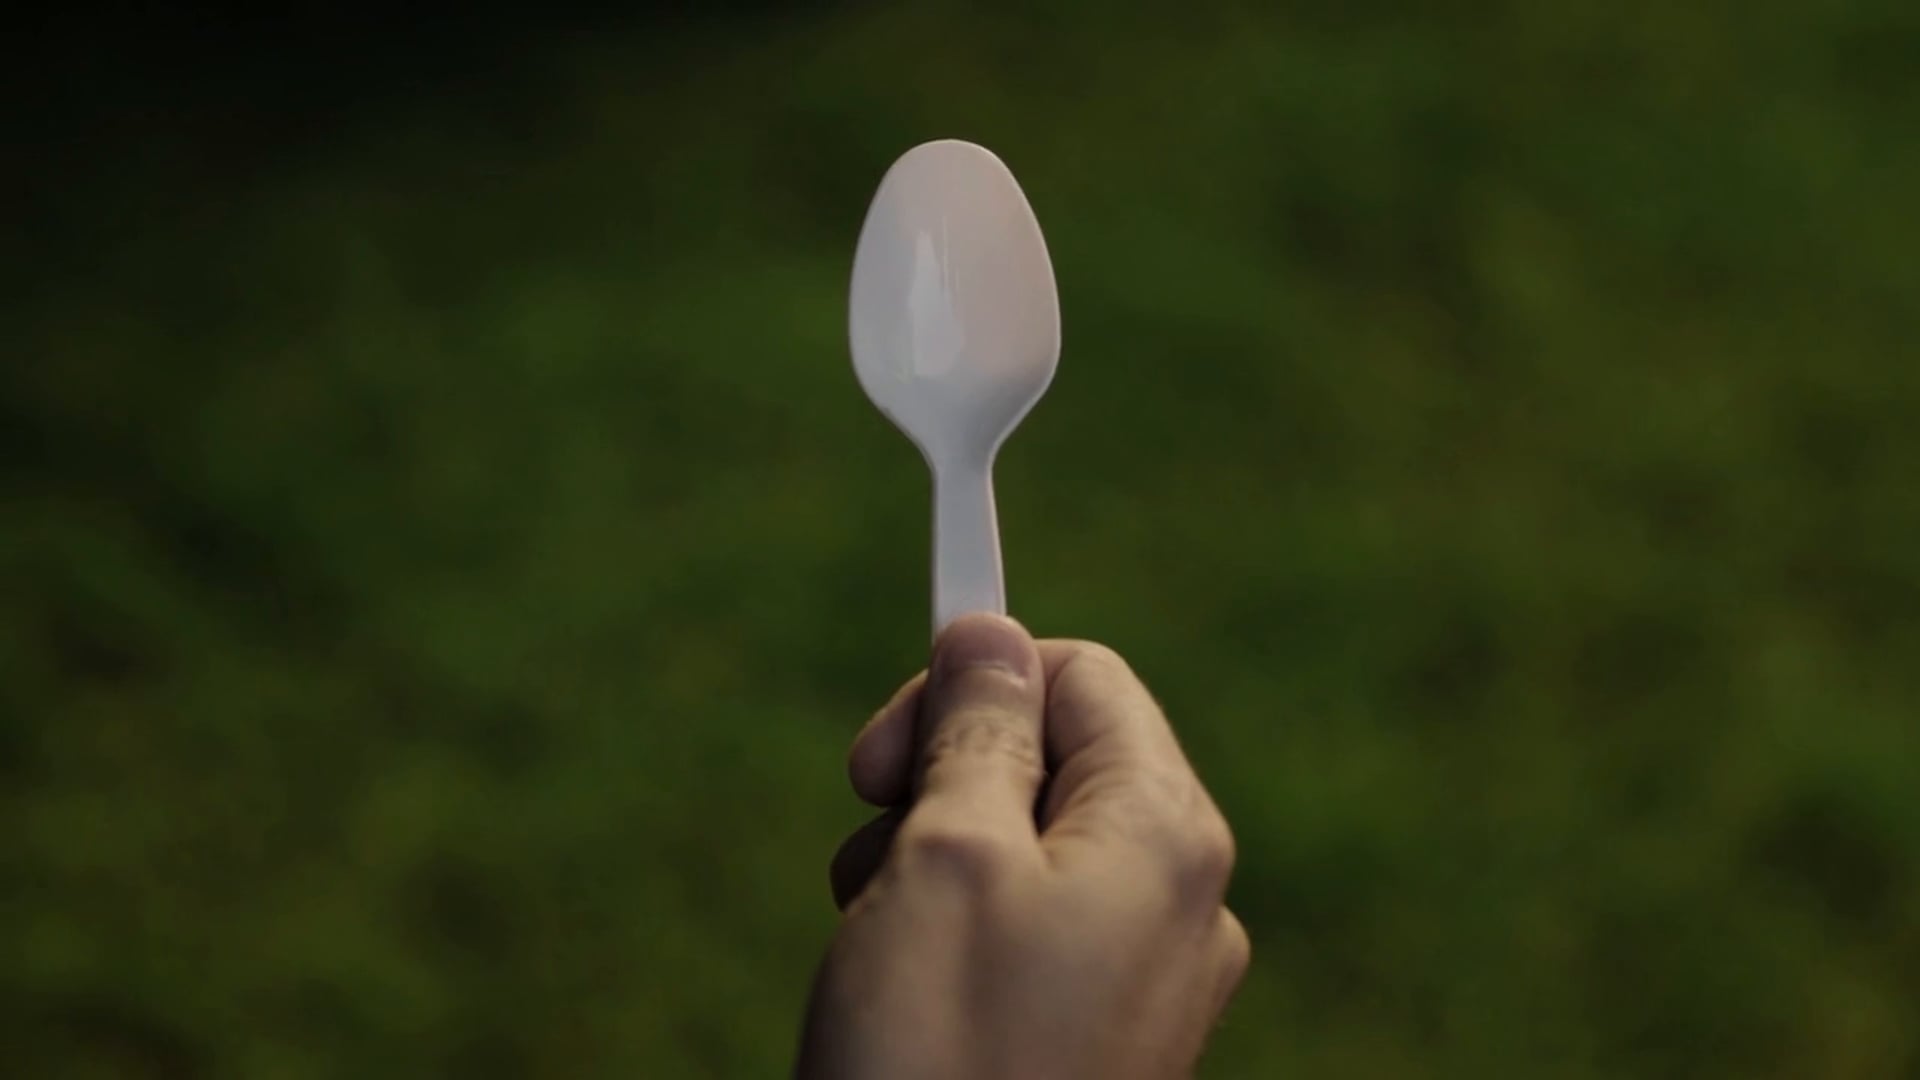 Story of a Spoon